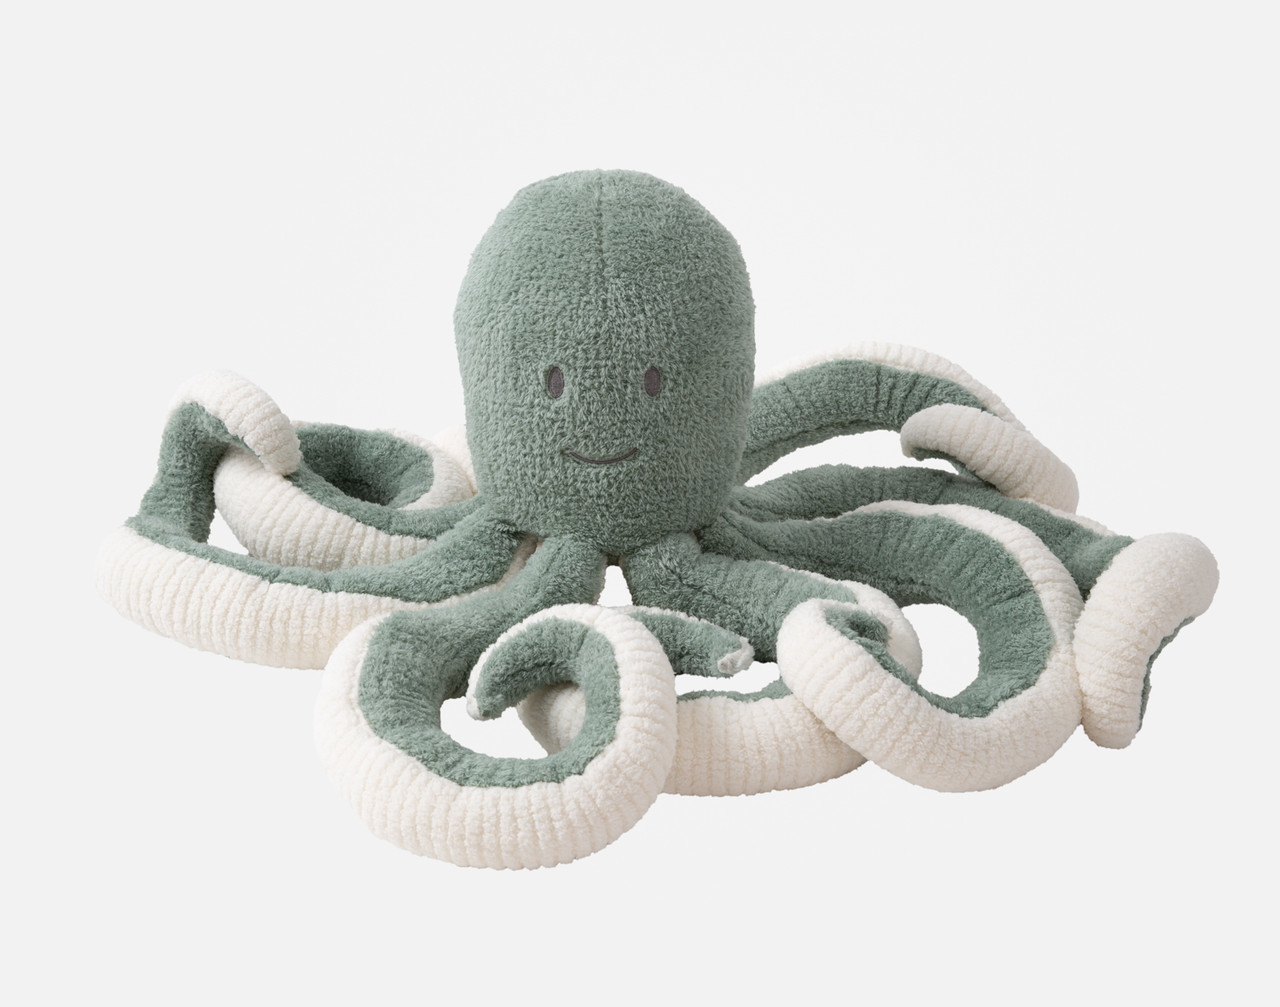 Front view of our Octopus Cushion sitting on a solid white background.